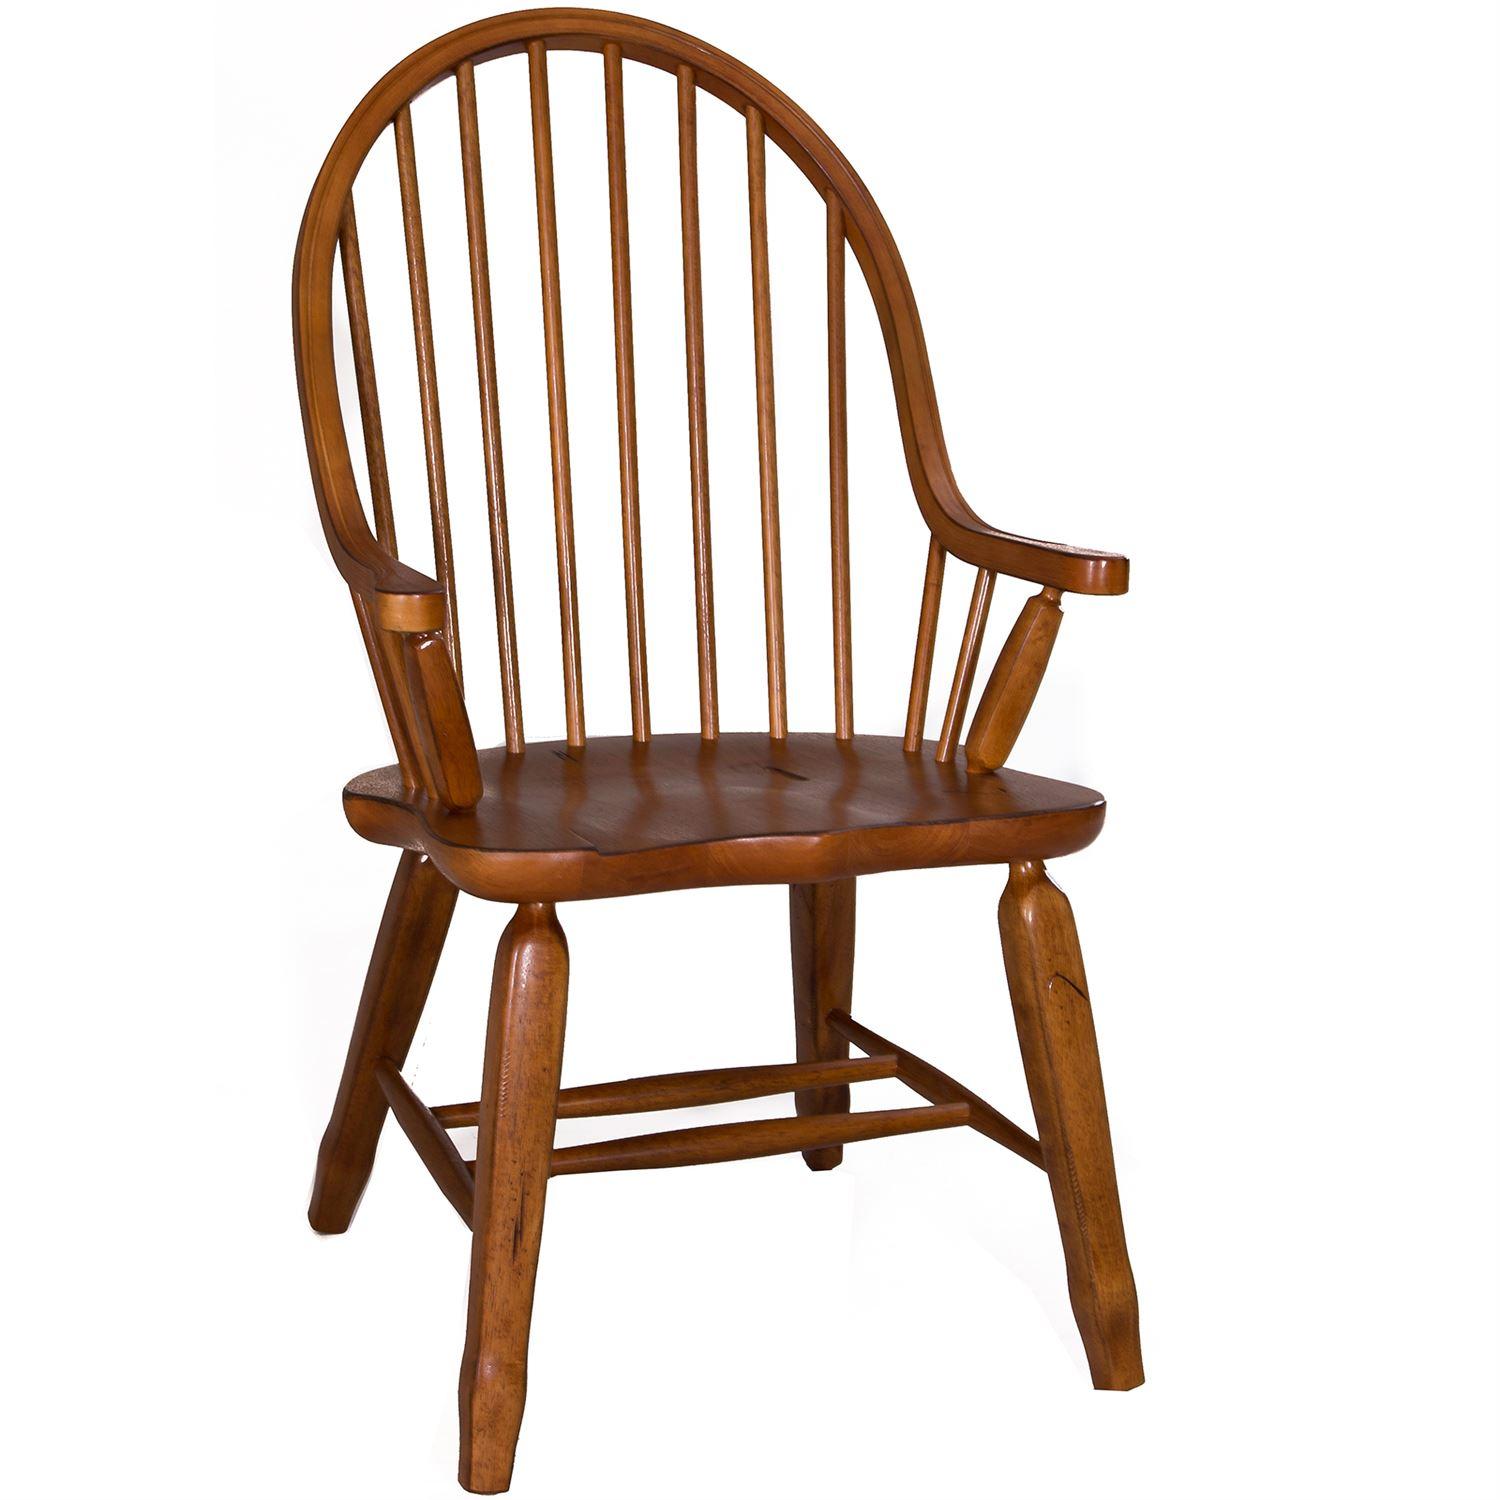   Treasures  (17-DR) Dining Arm Chair  